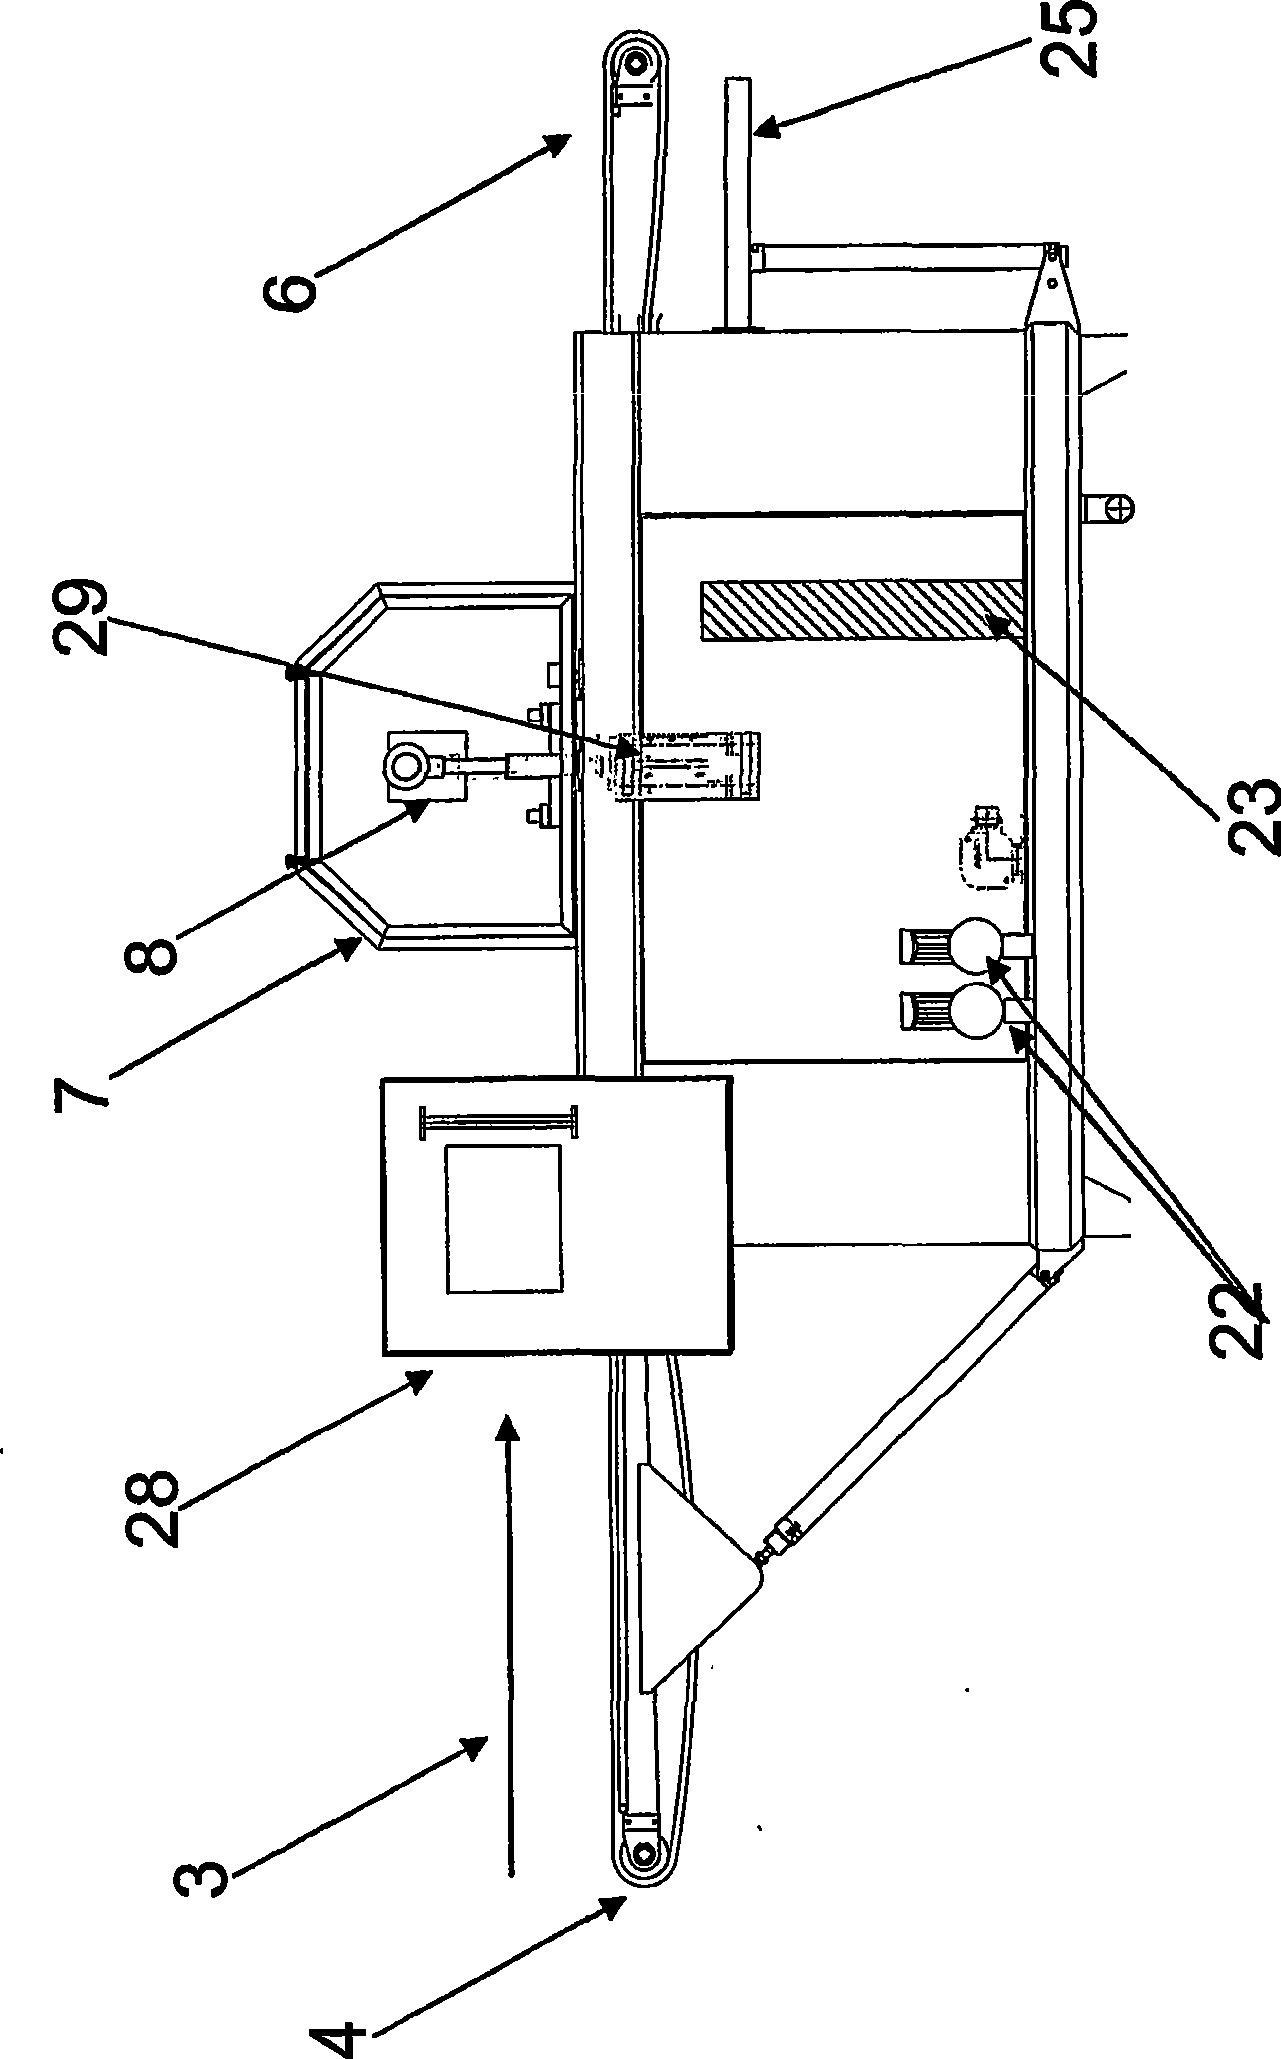 An apparatus for injecting liquid into food objects